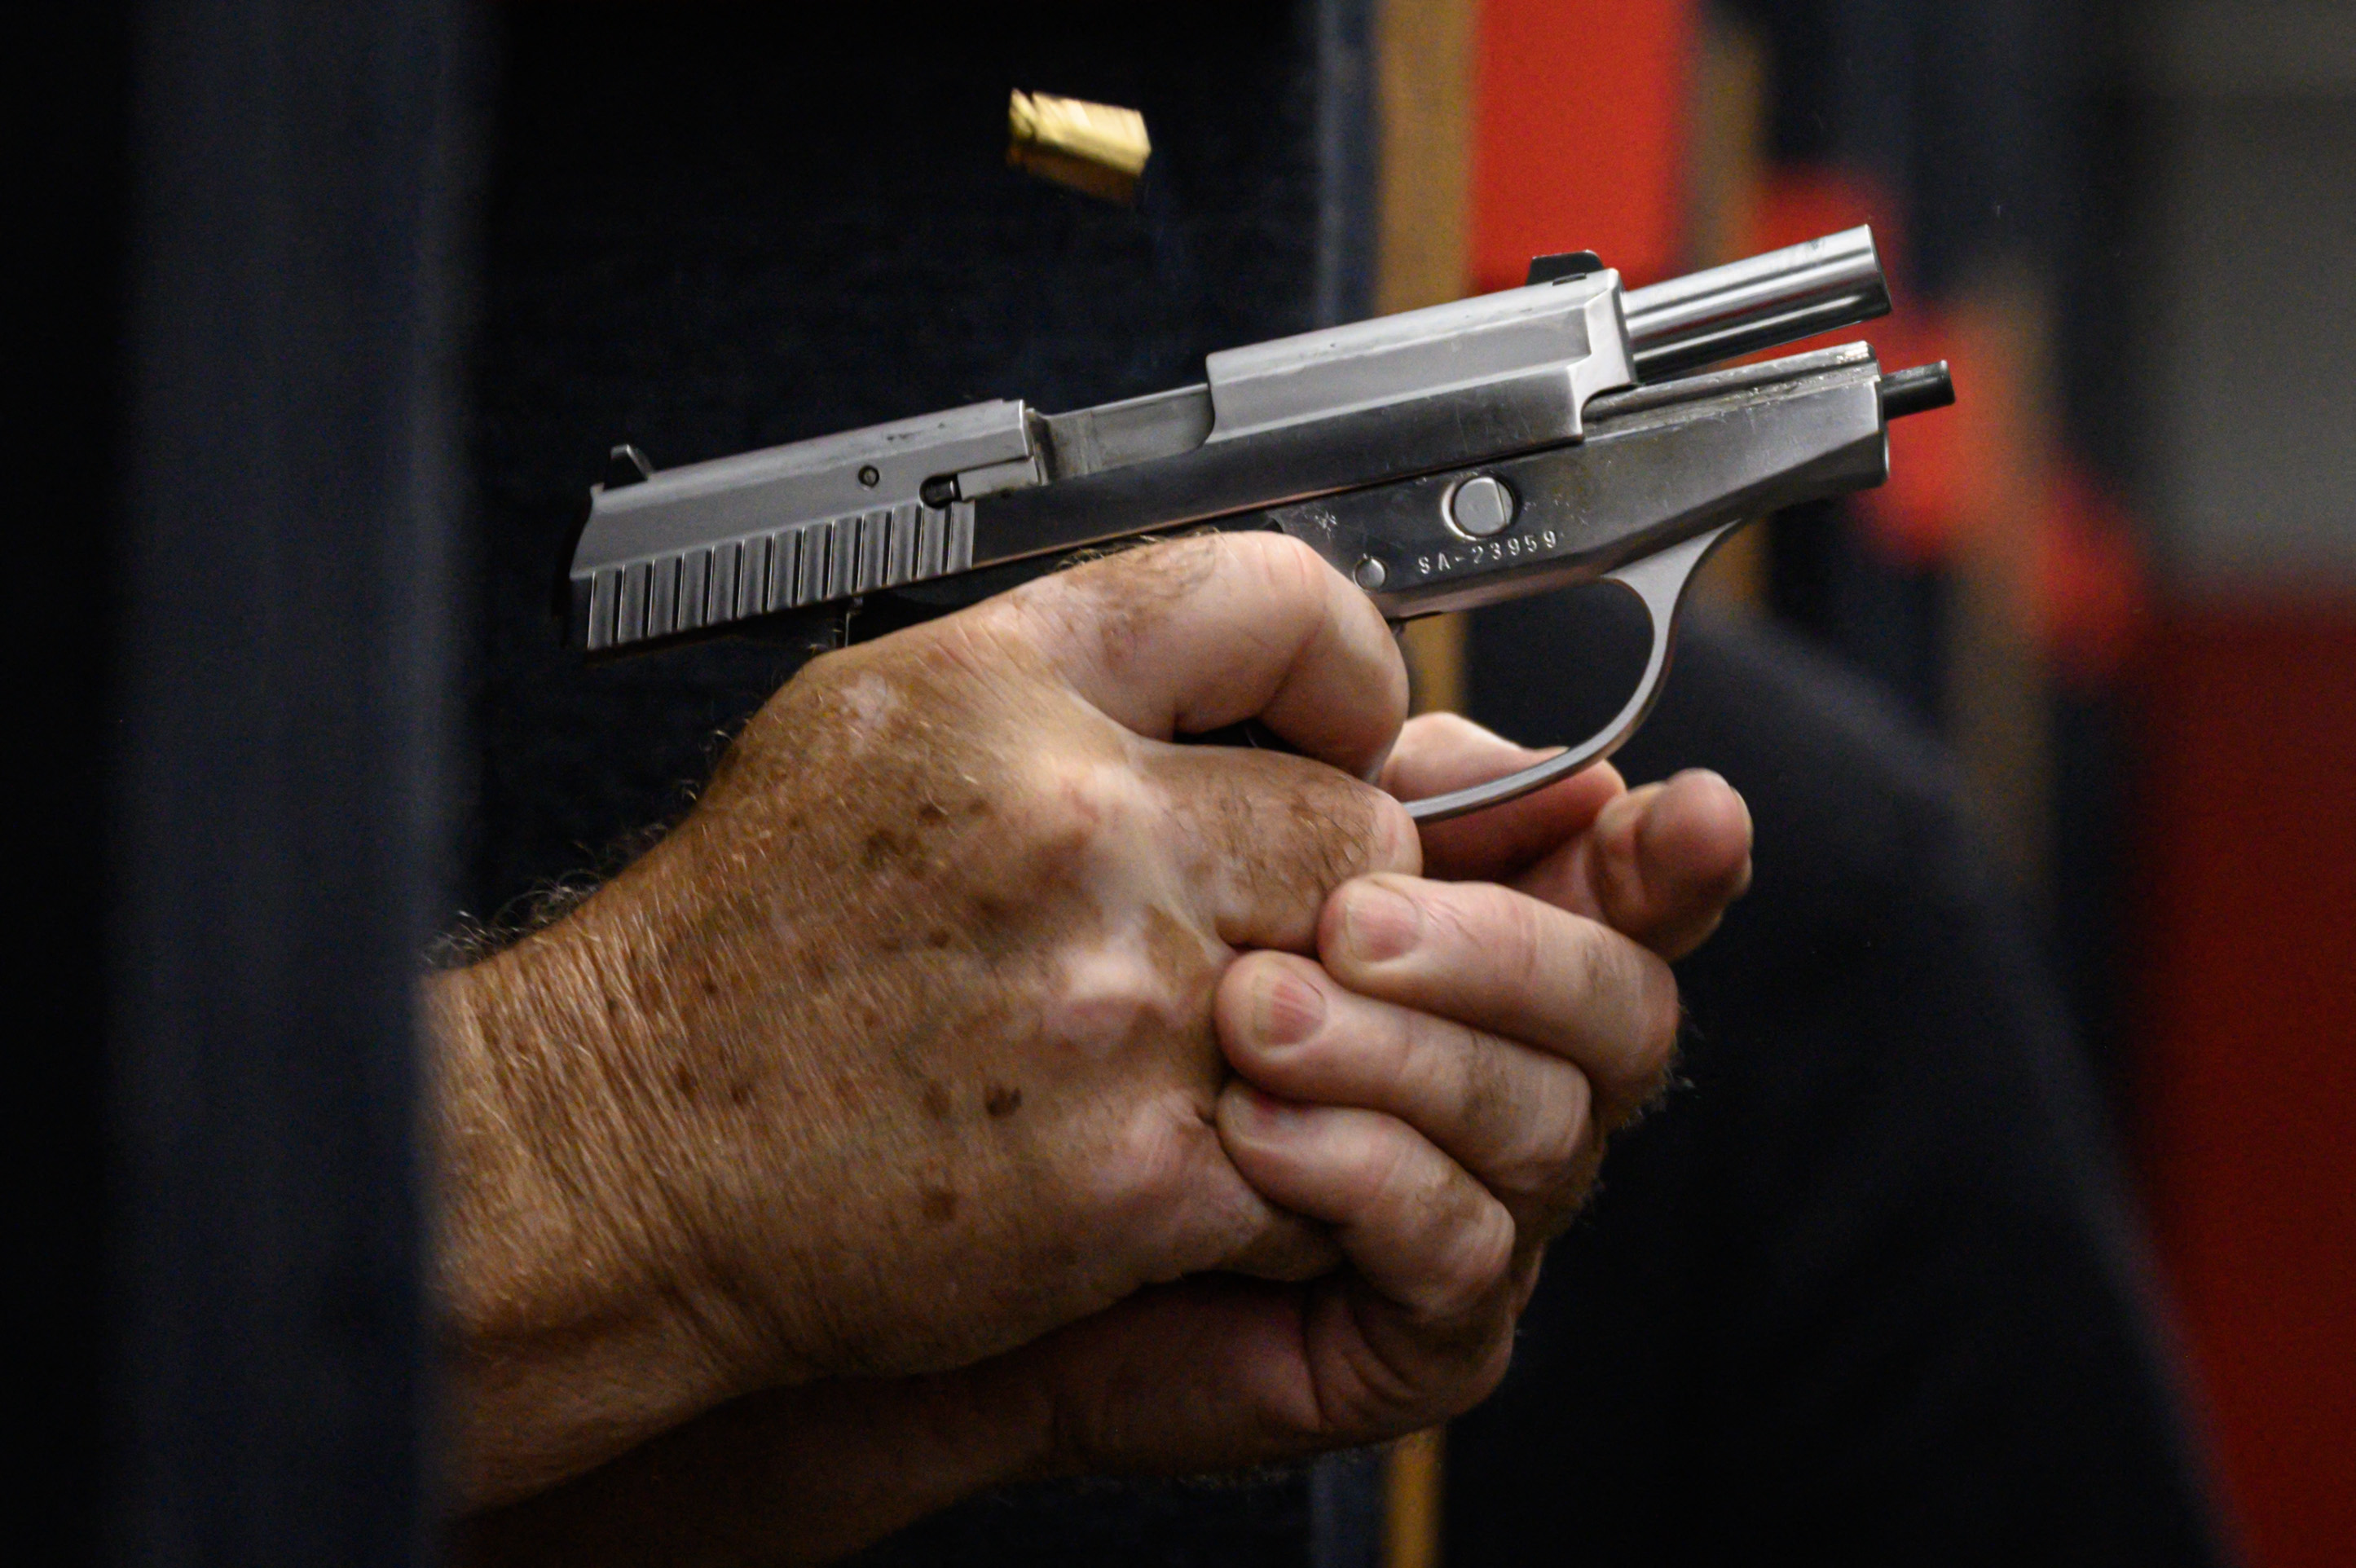 A handgun held in two hands and pointed away from the holder.